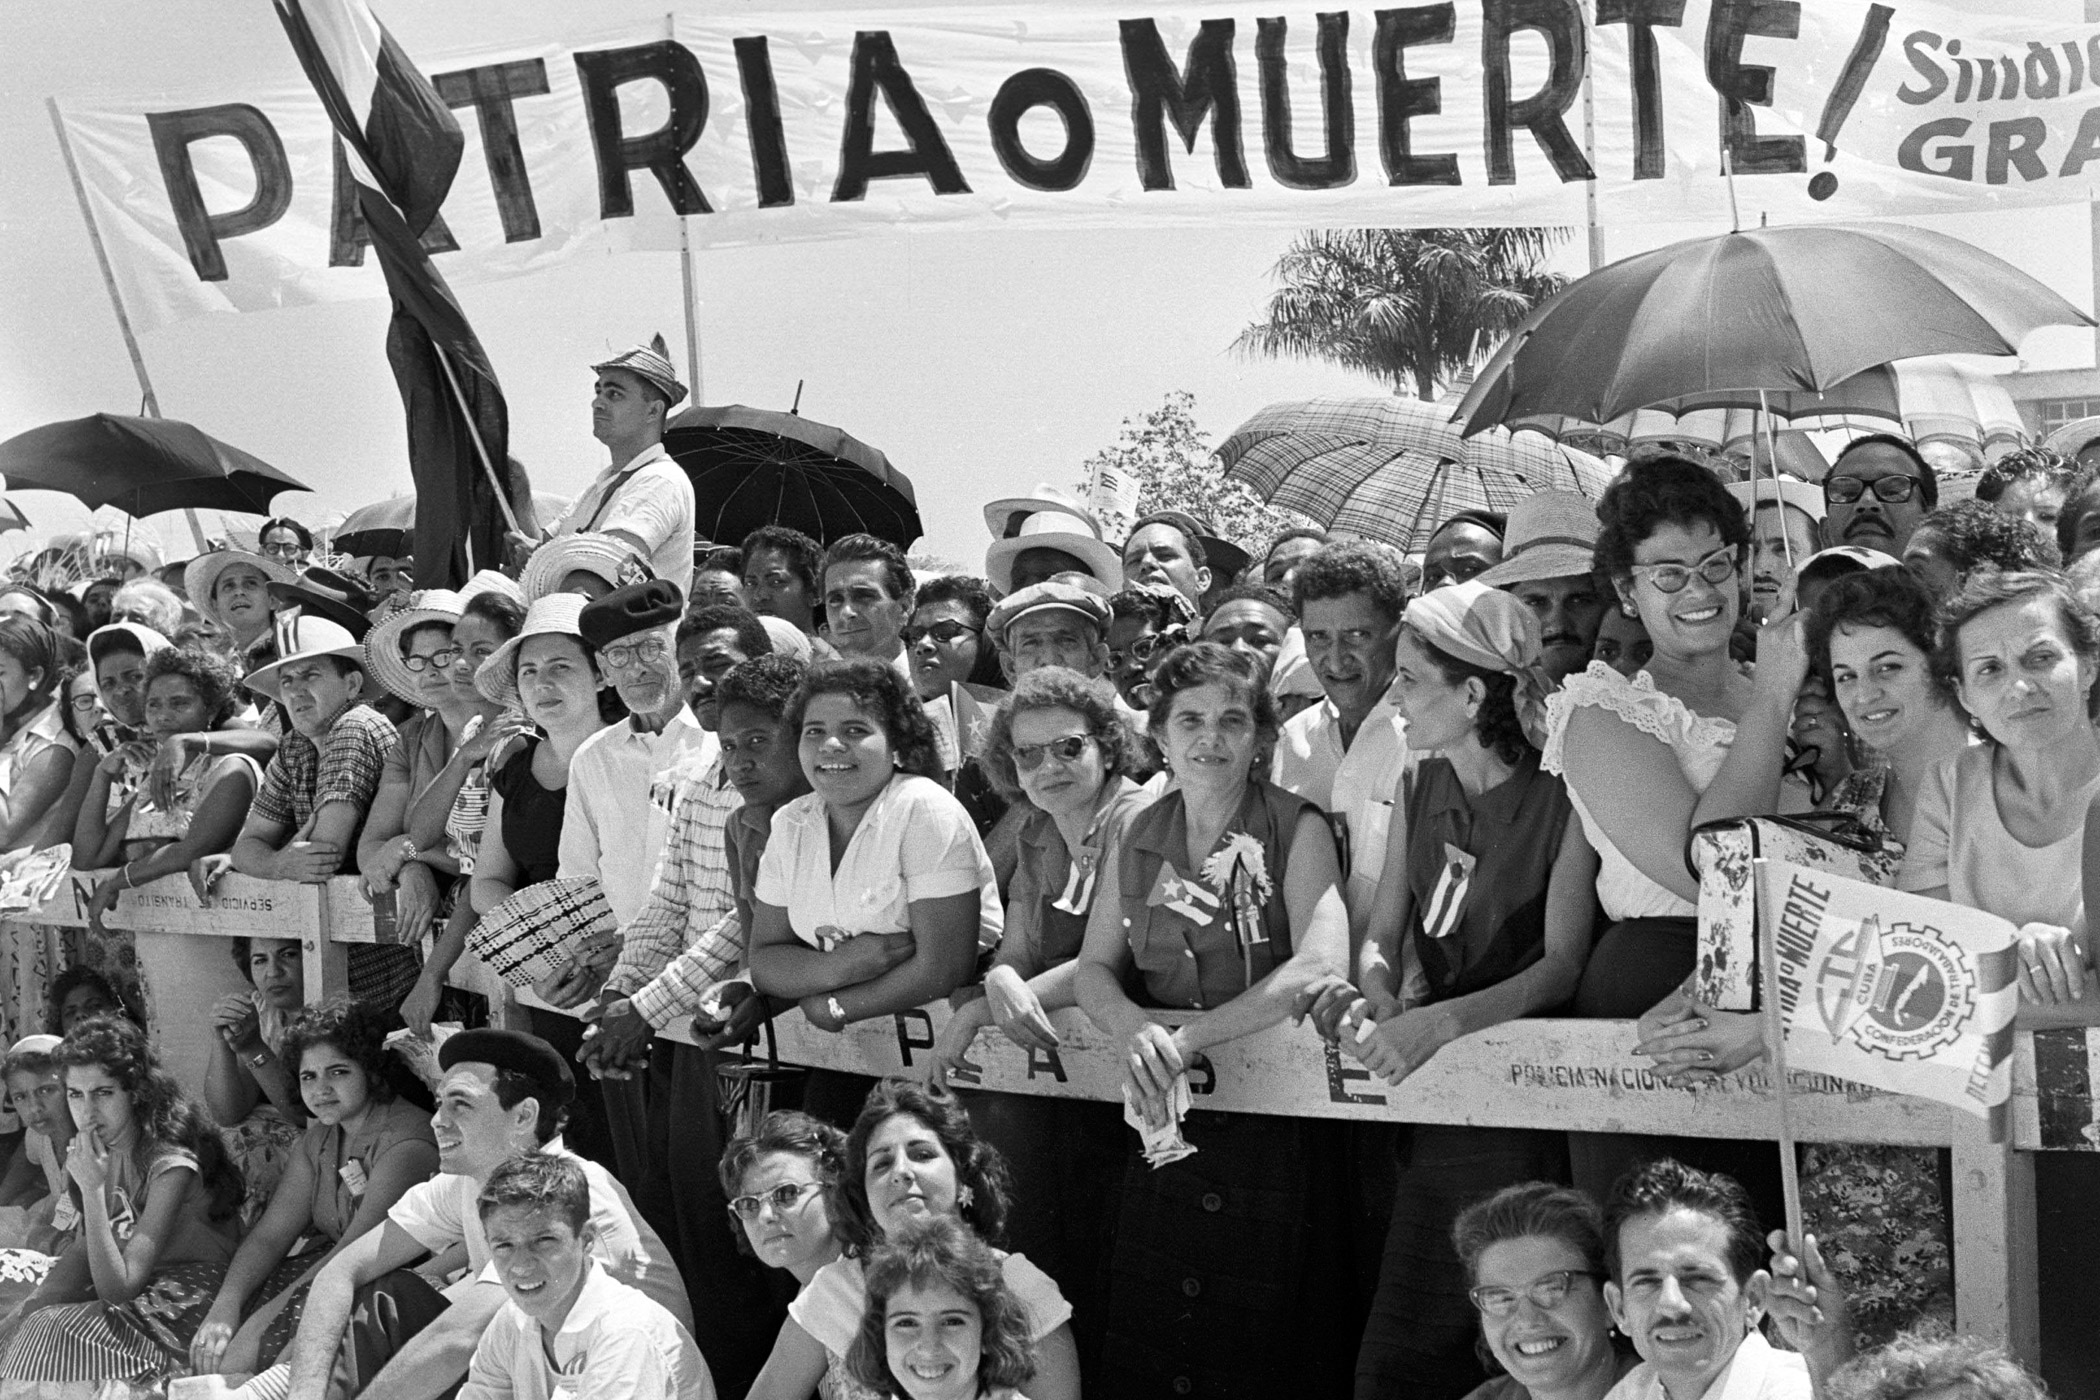 Cubans watch the May Day parade at the Plaza de la Revolucion in Havana on May 1, 1960.